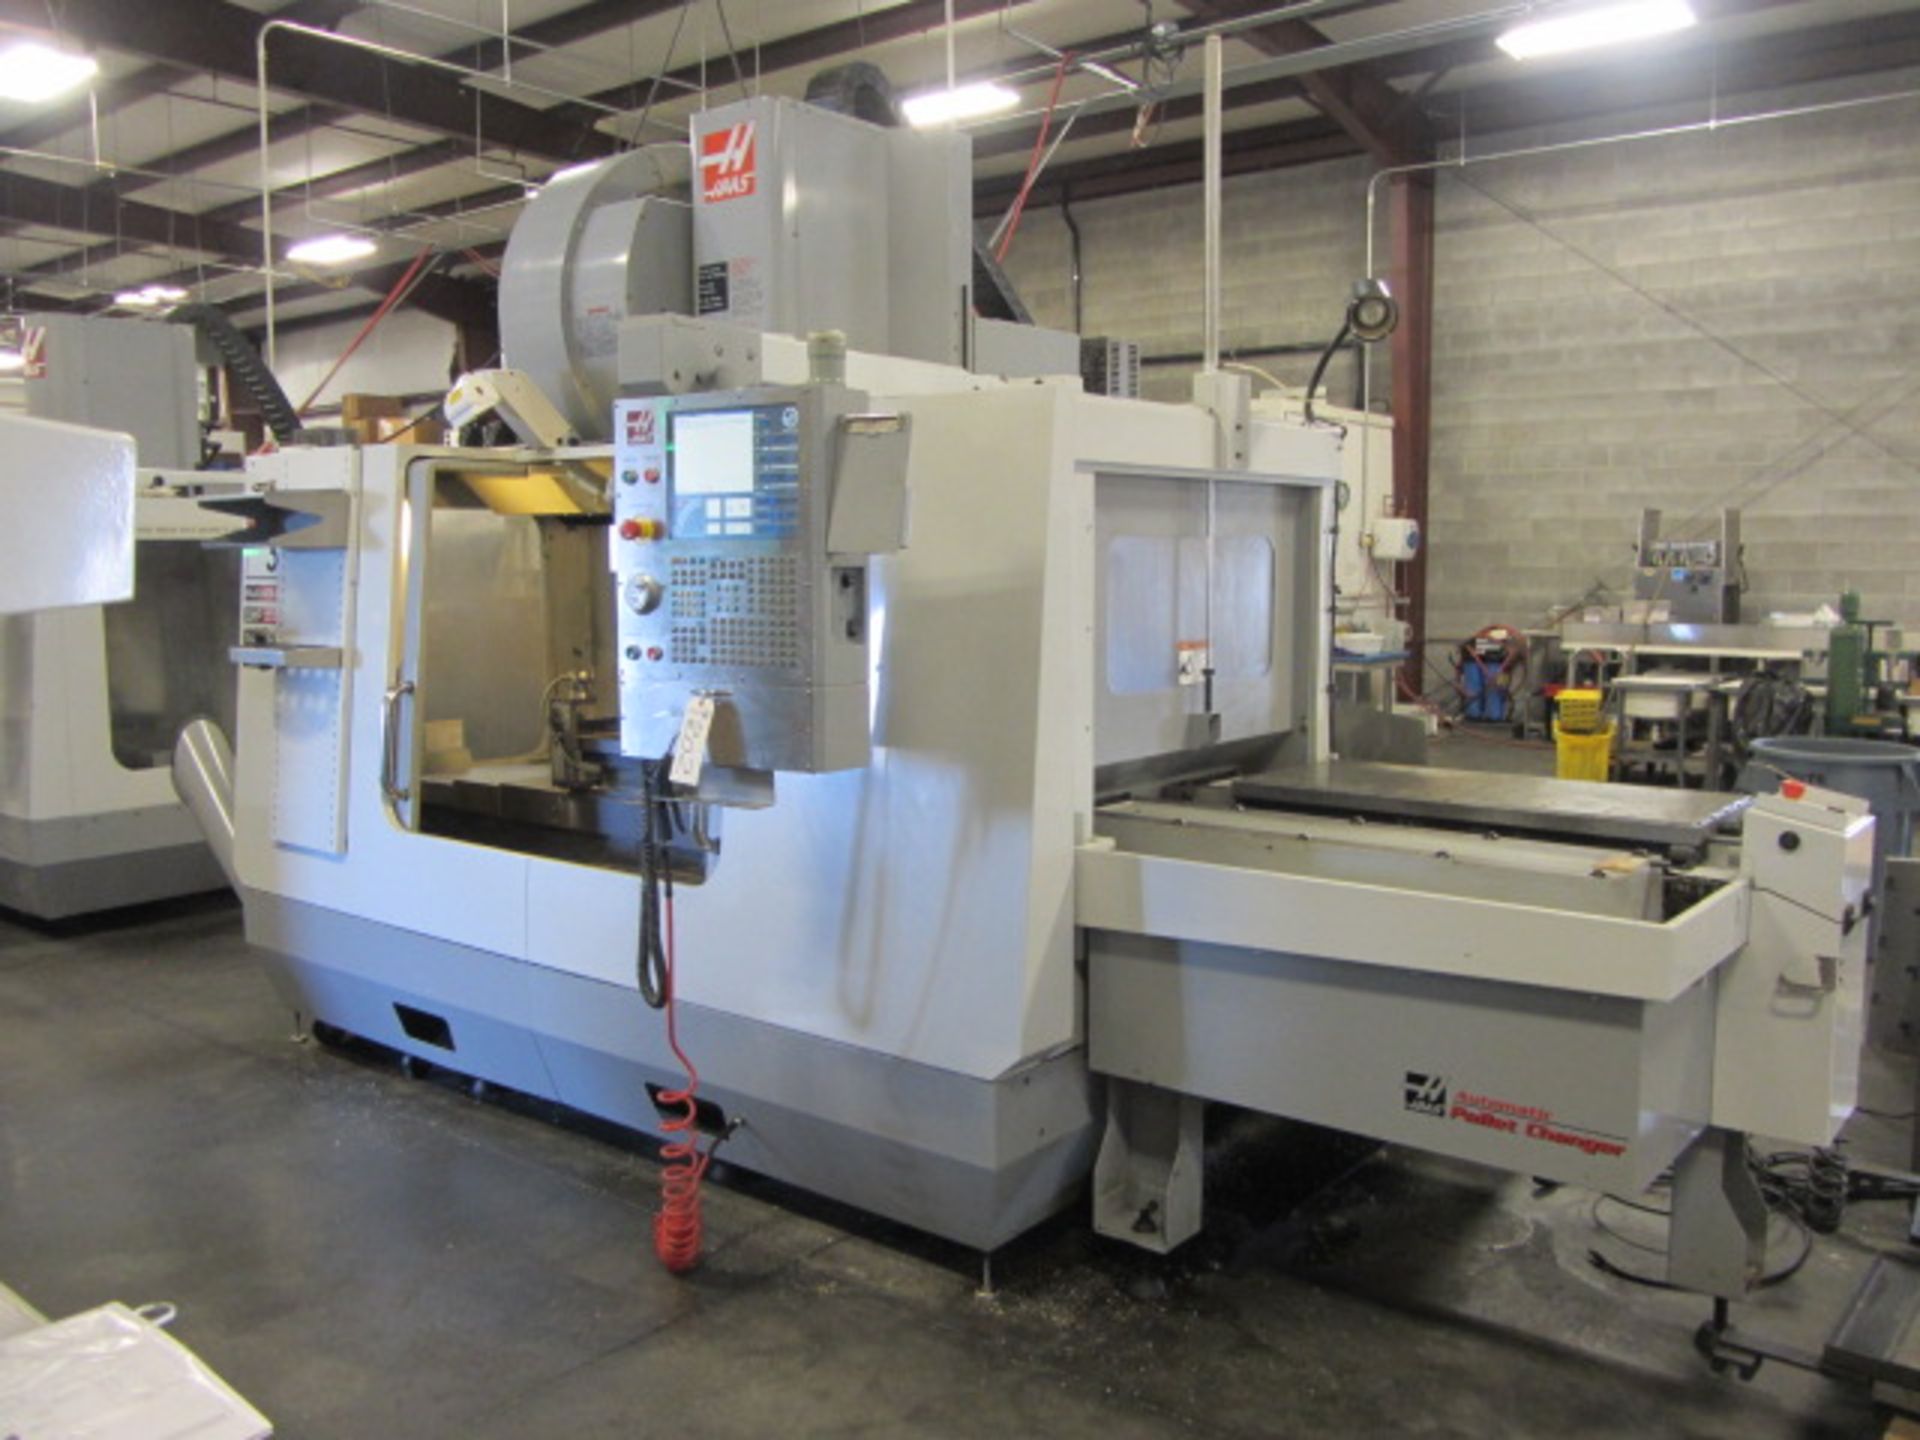 Haas VF3DAPC 4-Axis CNC Vertical Machining Center with Dual Pallet Changer, Intuitive Probing, - Image 7 of 10